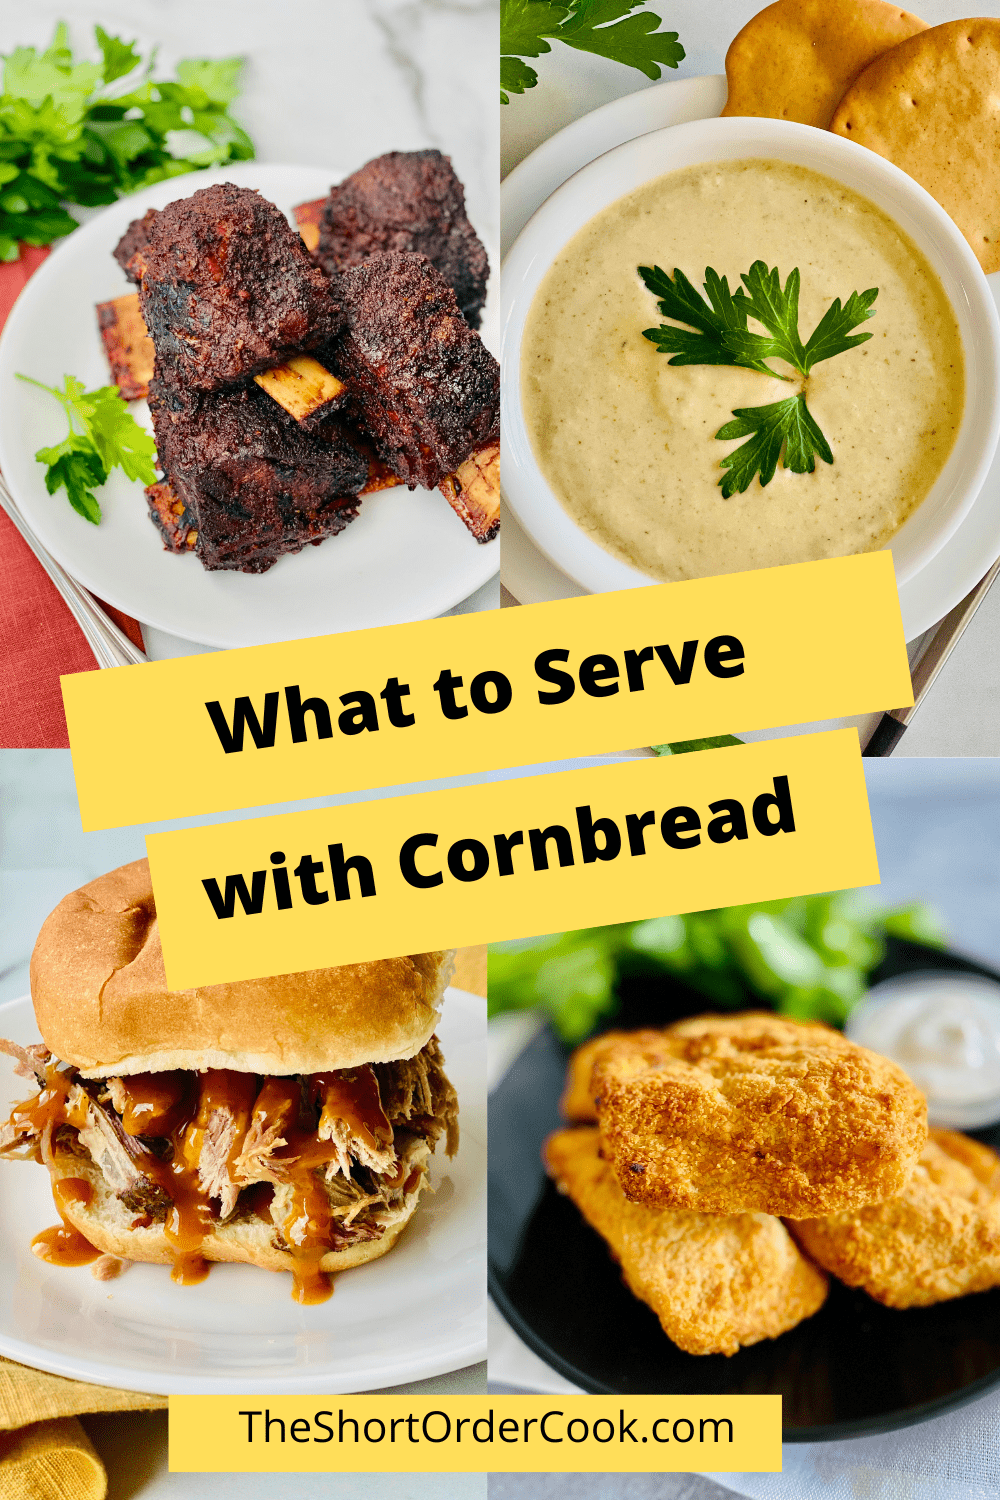 4 recipes images for what to serve with cornbread ribs, soup, pulled pork and fried fish